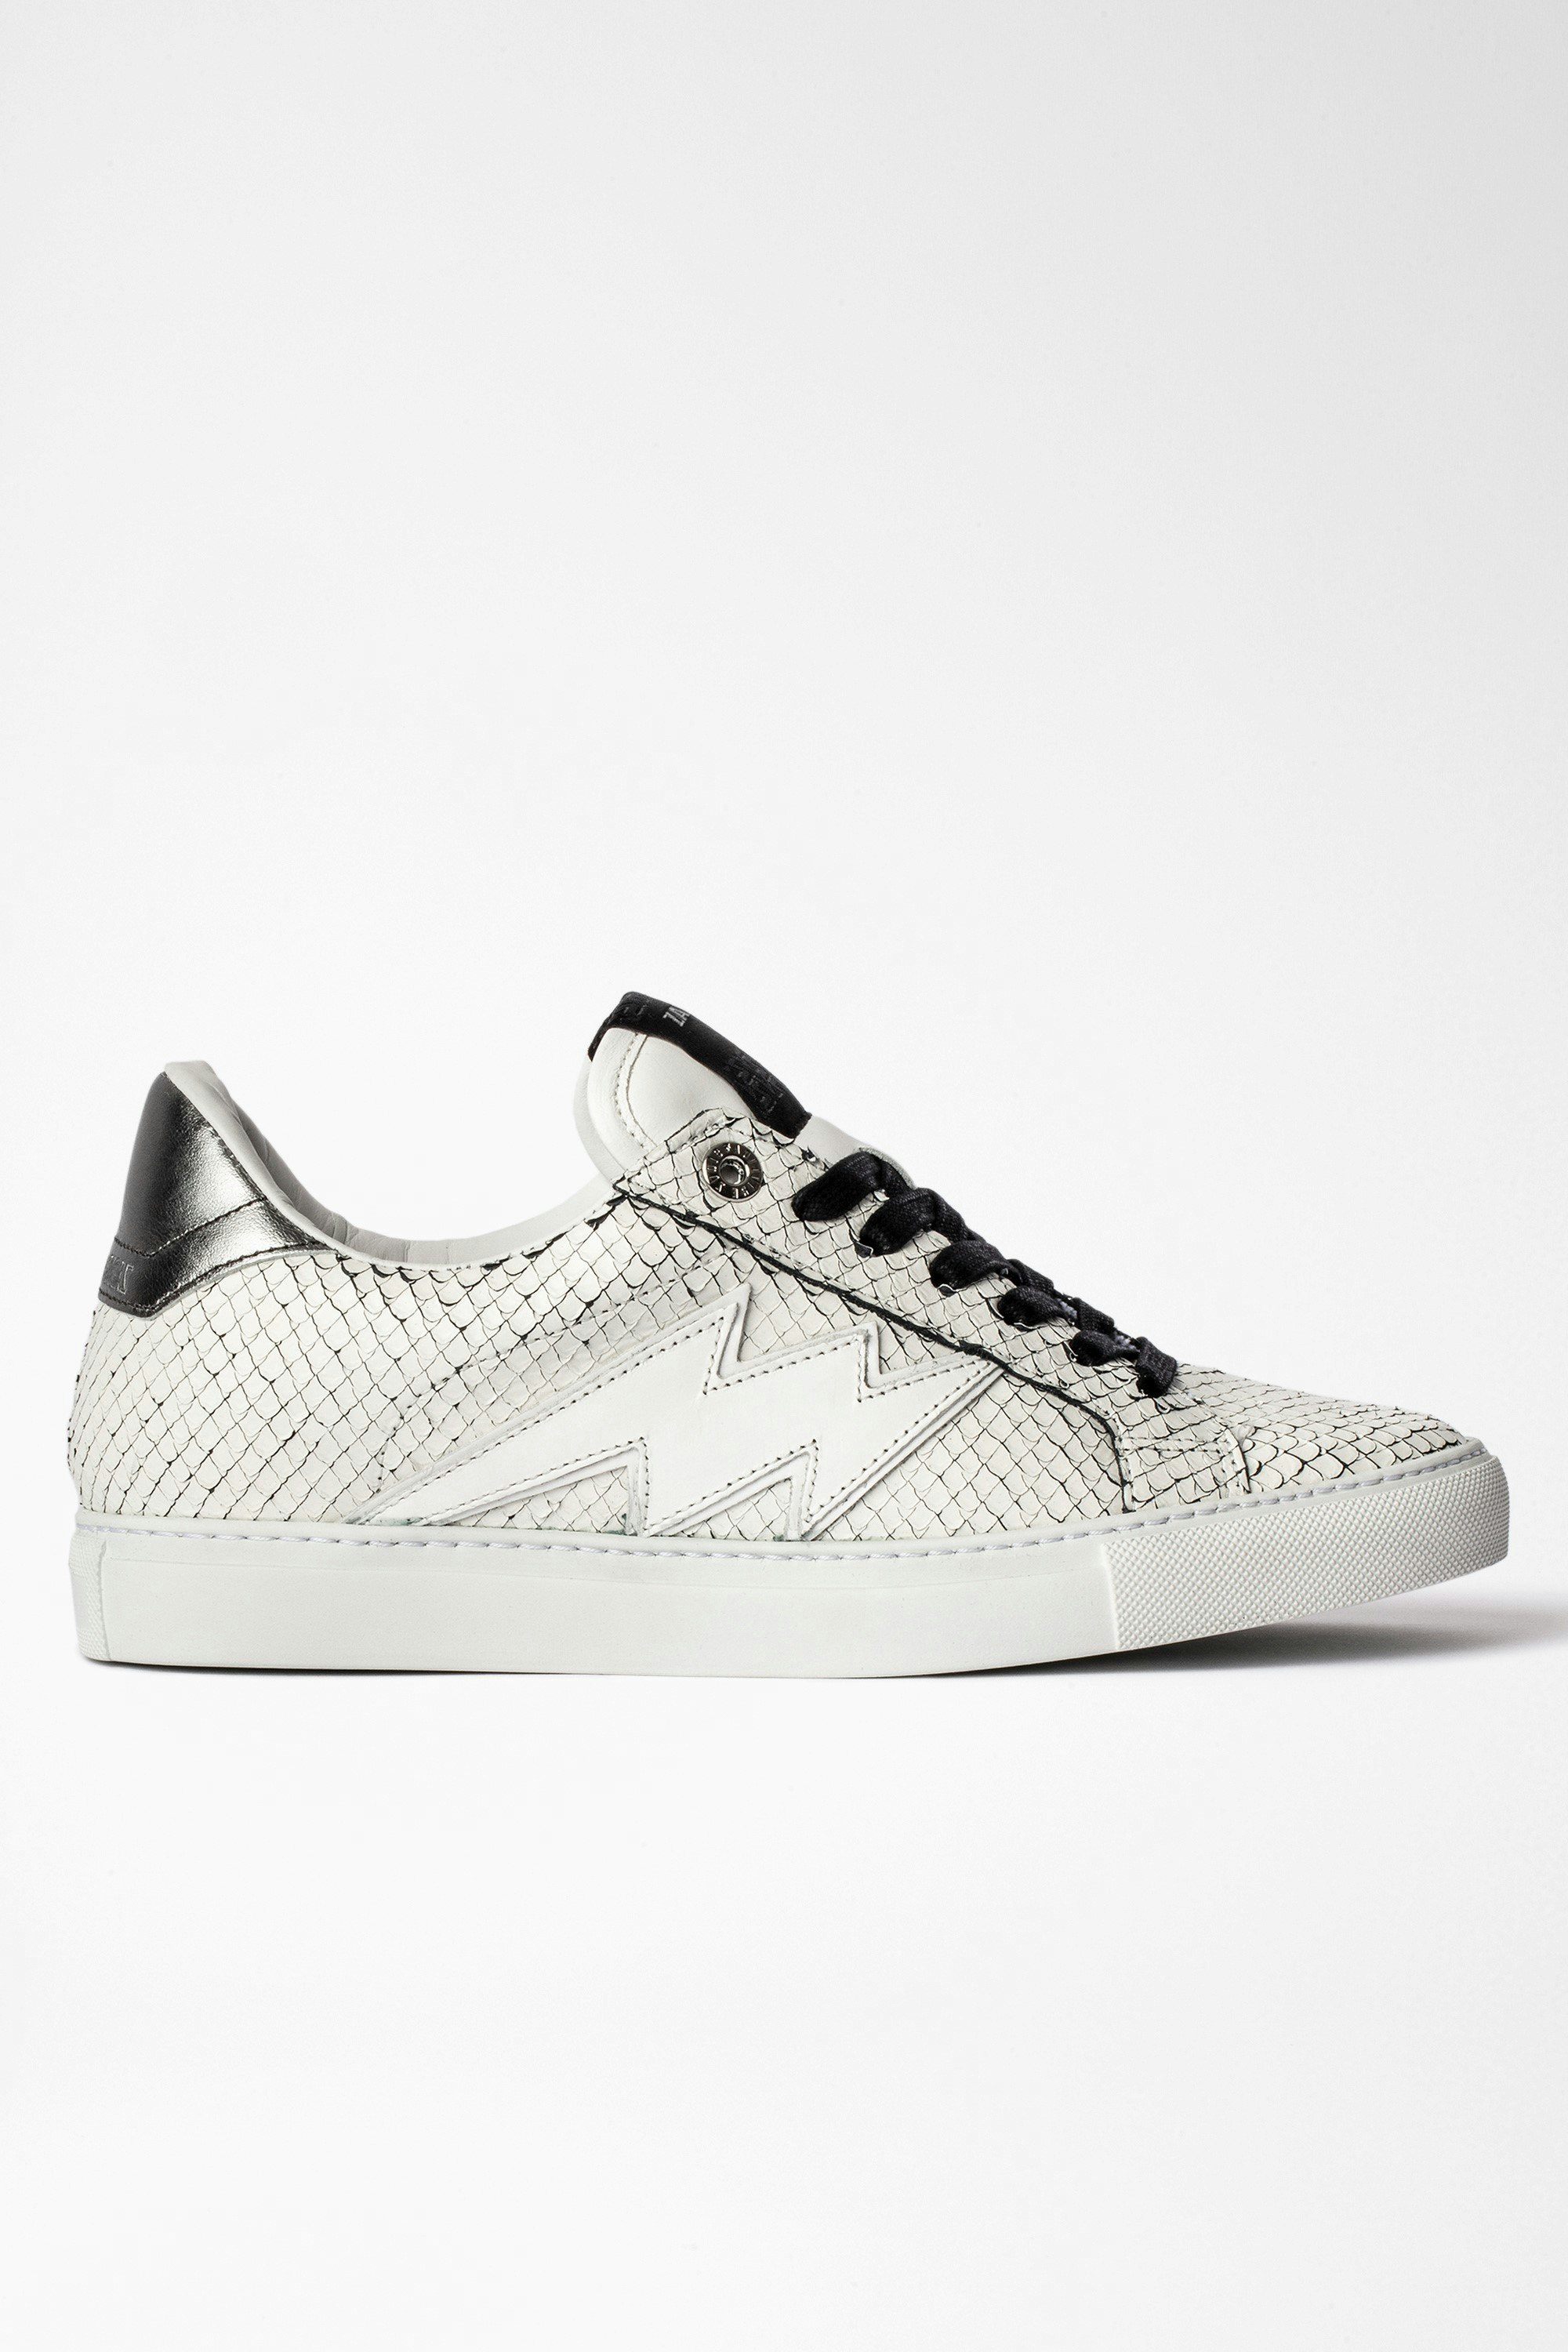 ZV1747 Keith Sneakers Women’s white snakeskin-effect leather sneakers